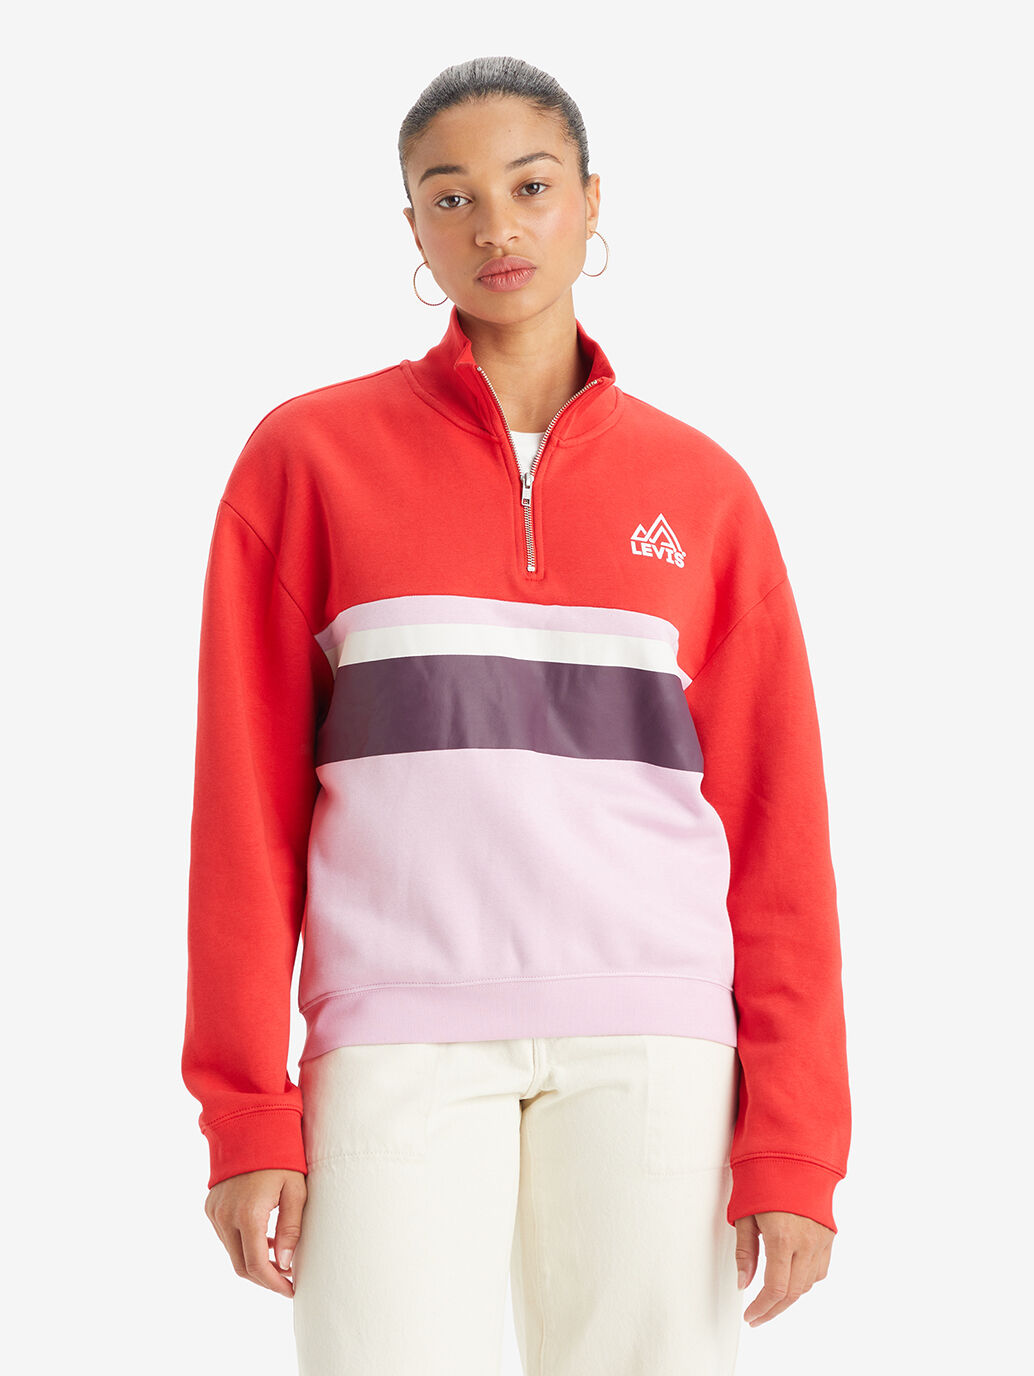 Red Half-Zip Sweatshirt for Women - With a Supersoft Fabric